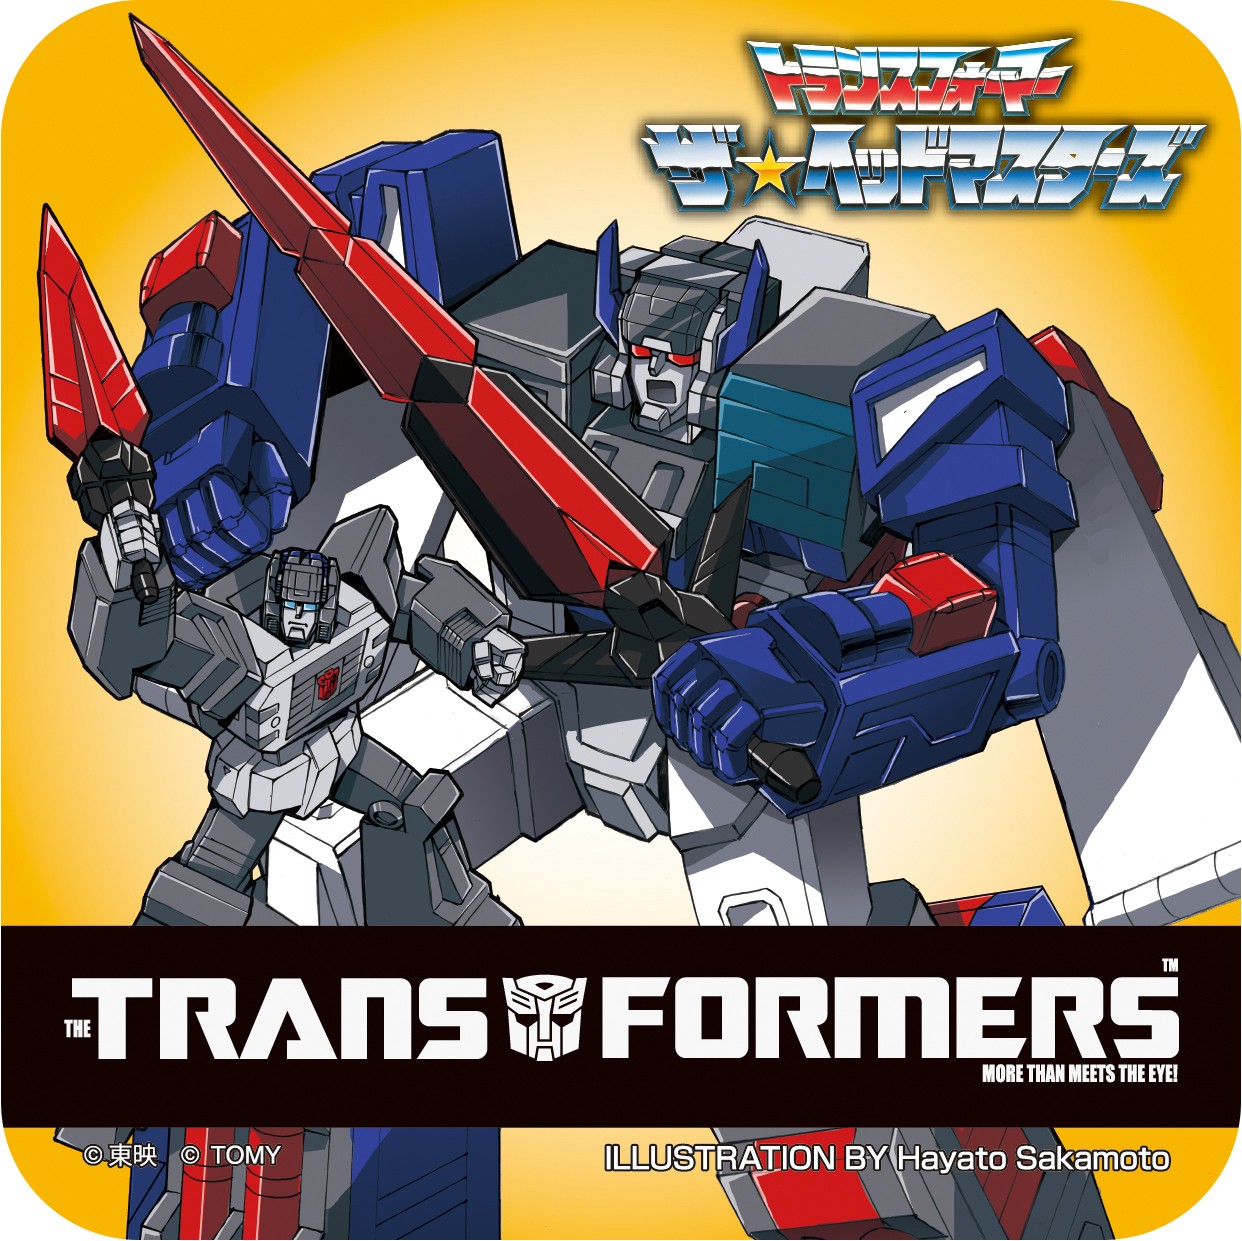 Transformers News: Takara Tomy Transformers Coasters Promotion Campaign